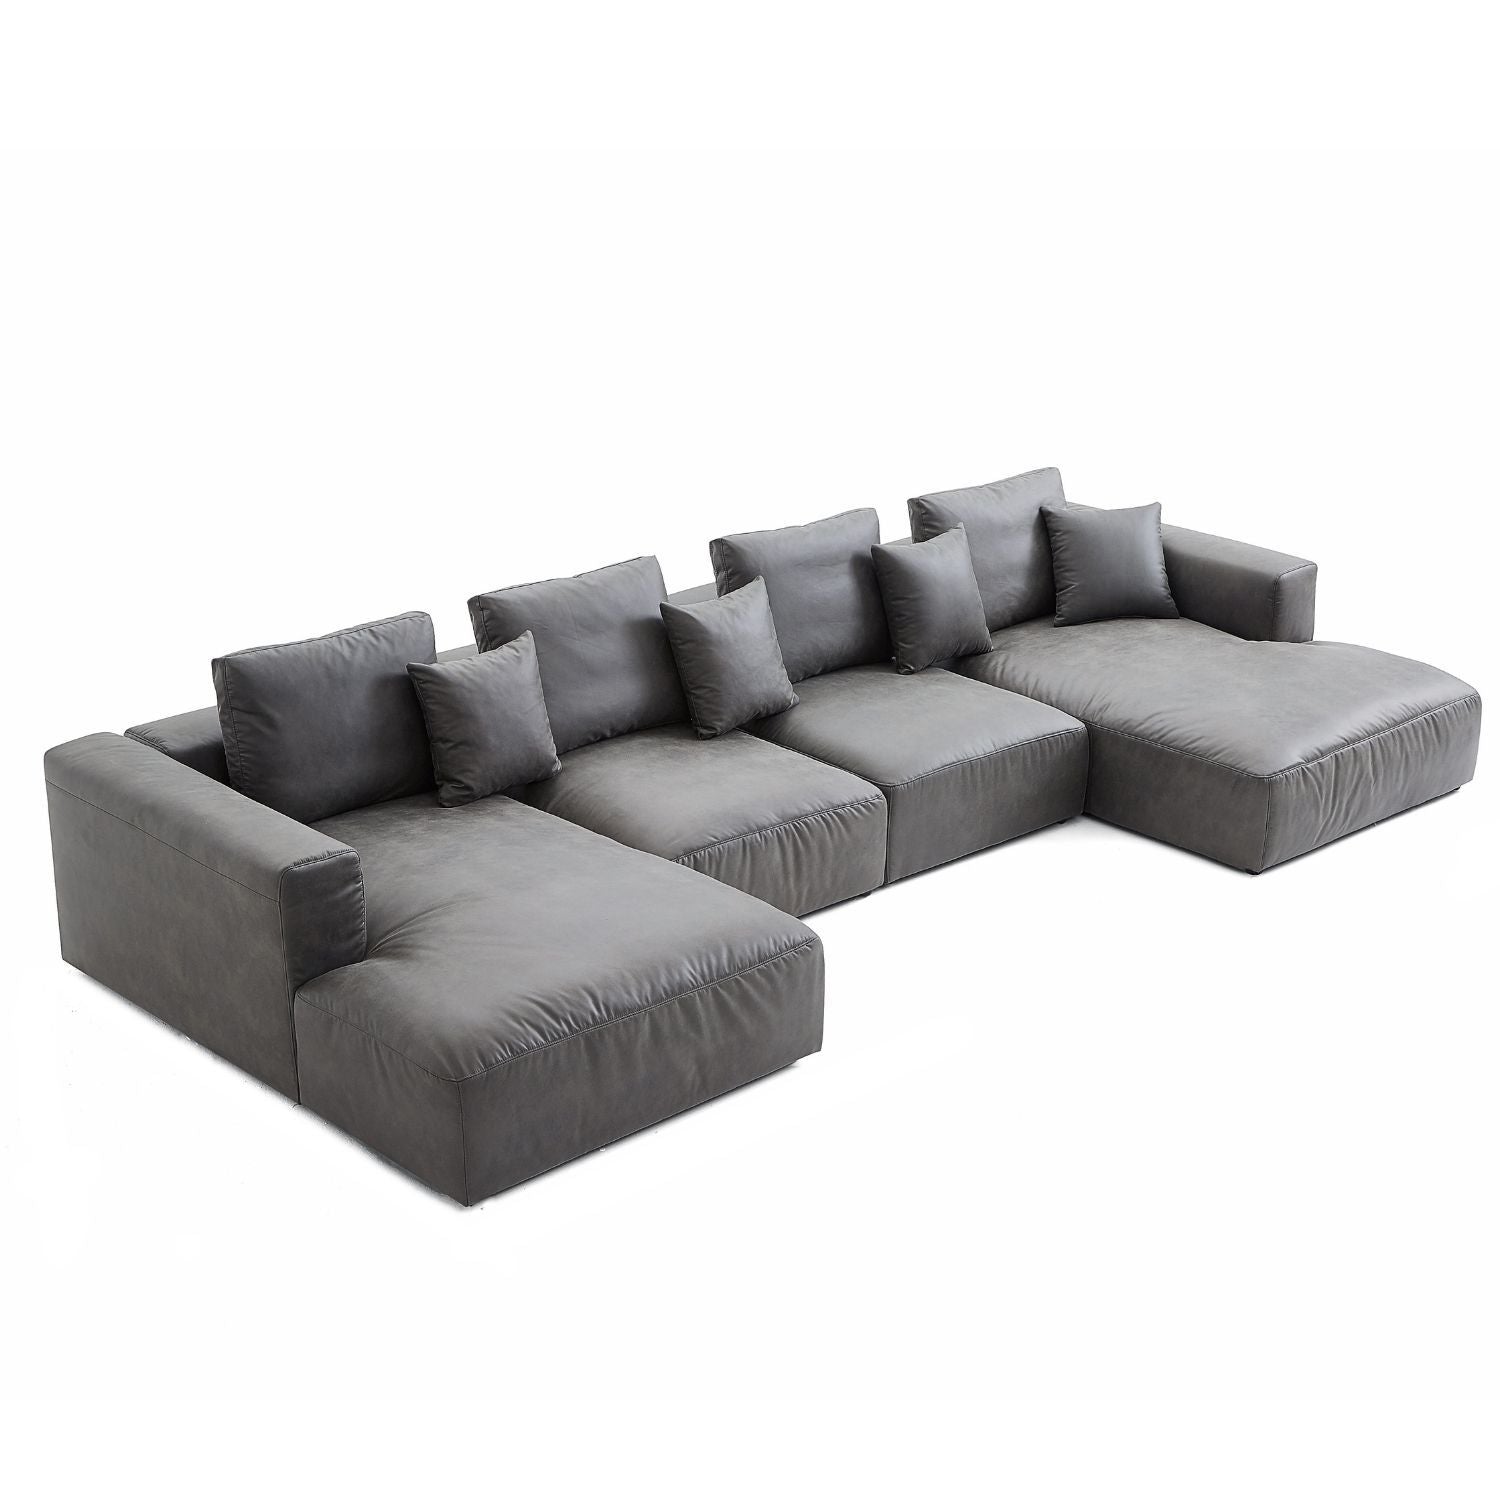 The 5th U sectional Sofa Foundry 